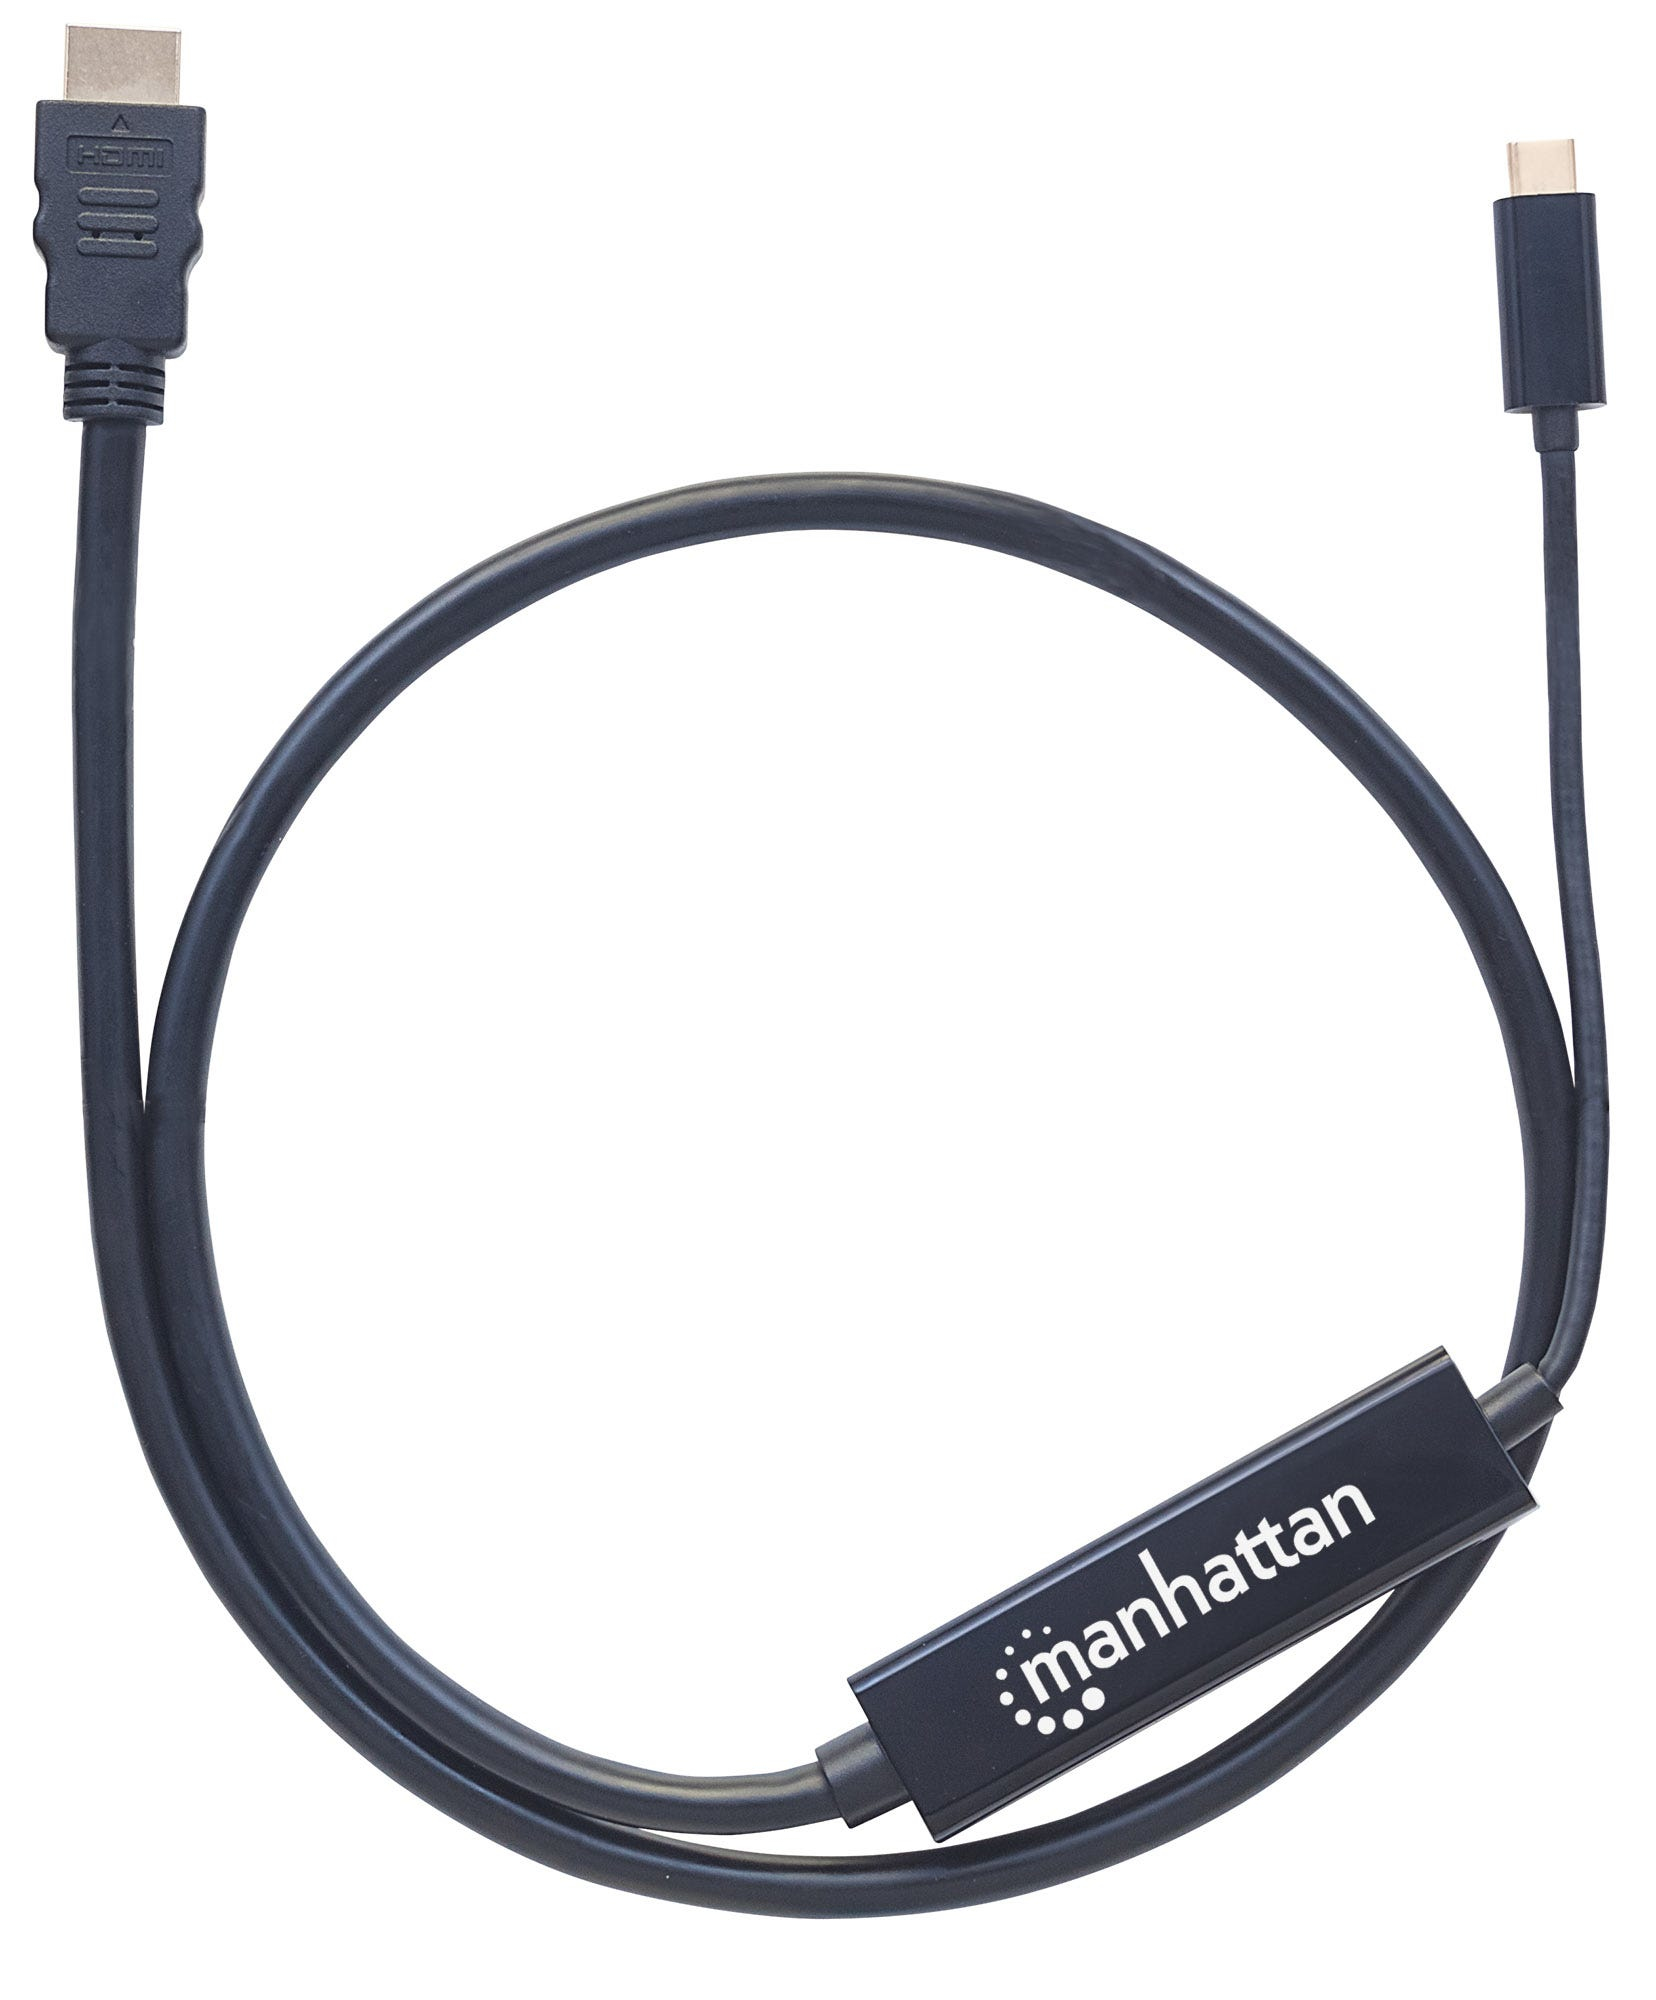 Manhattan USB-C to HDMI Cable, 4K, 1m, Male to Male, 3840x2160@60Hz; 4K Ultra HD Video Aspect Ratio 21:9, Black, Polybag